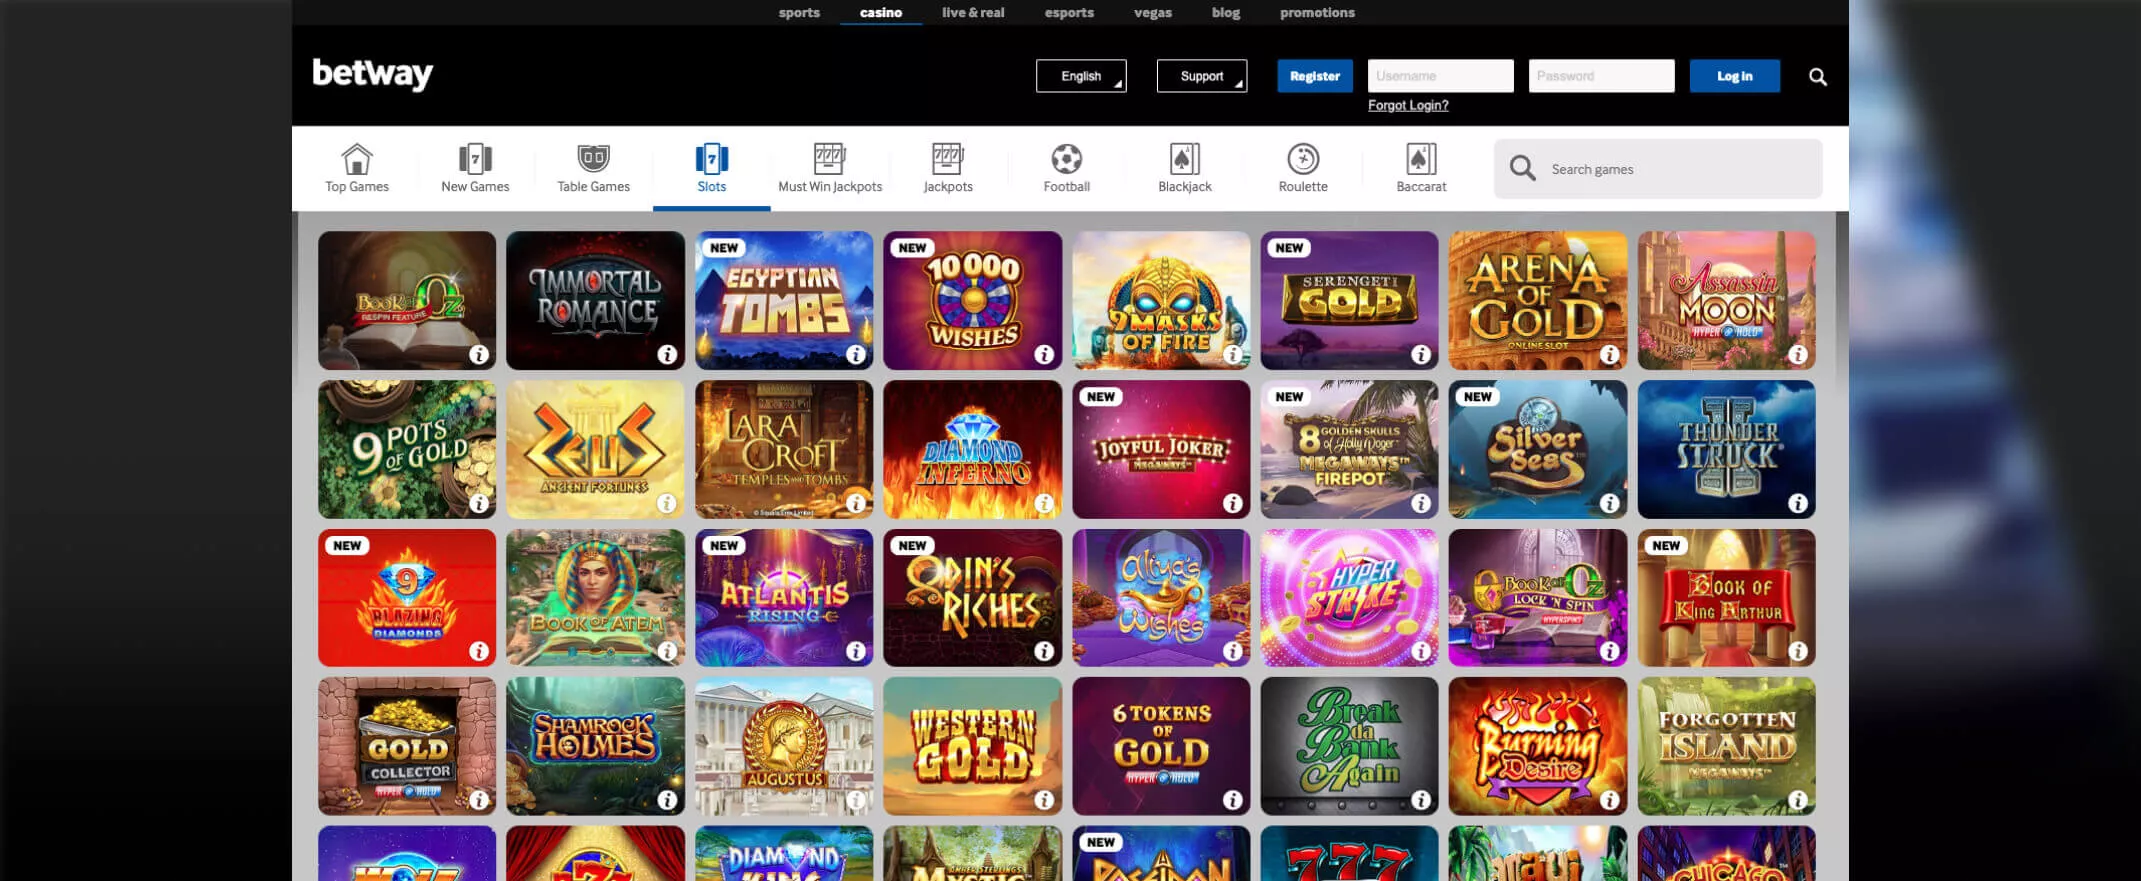 Betway casino review screenshot of the games